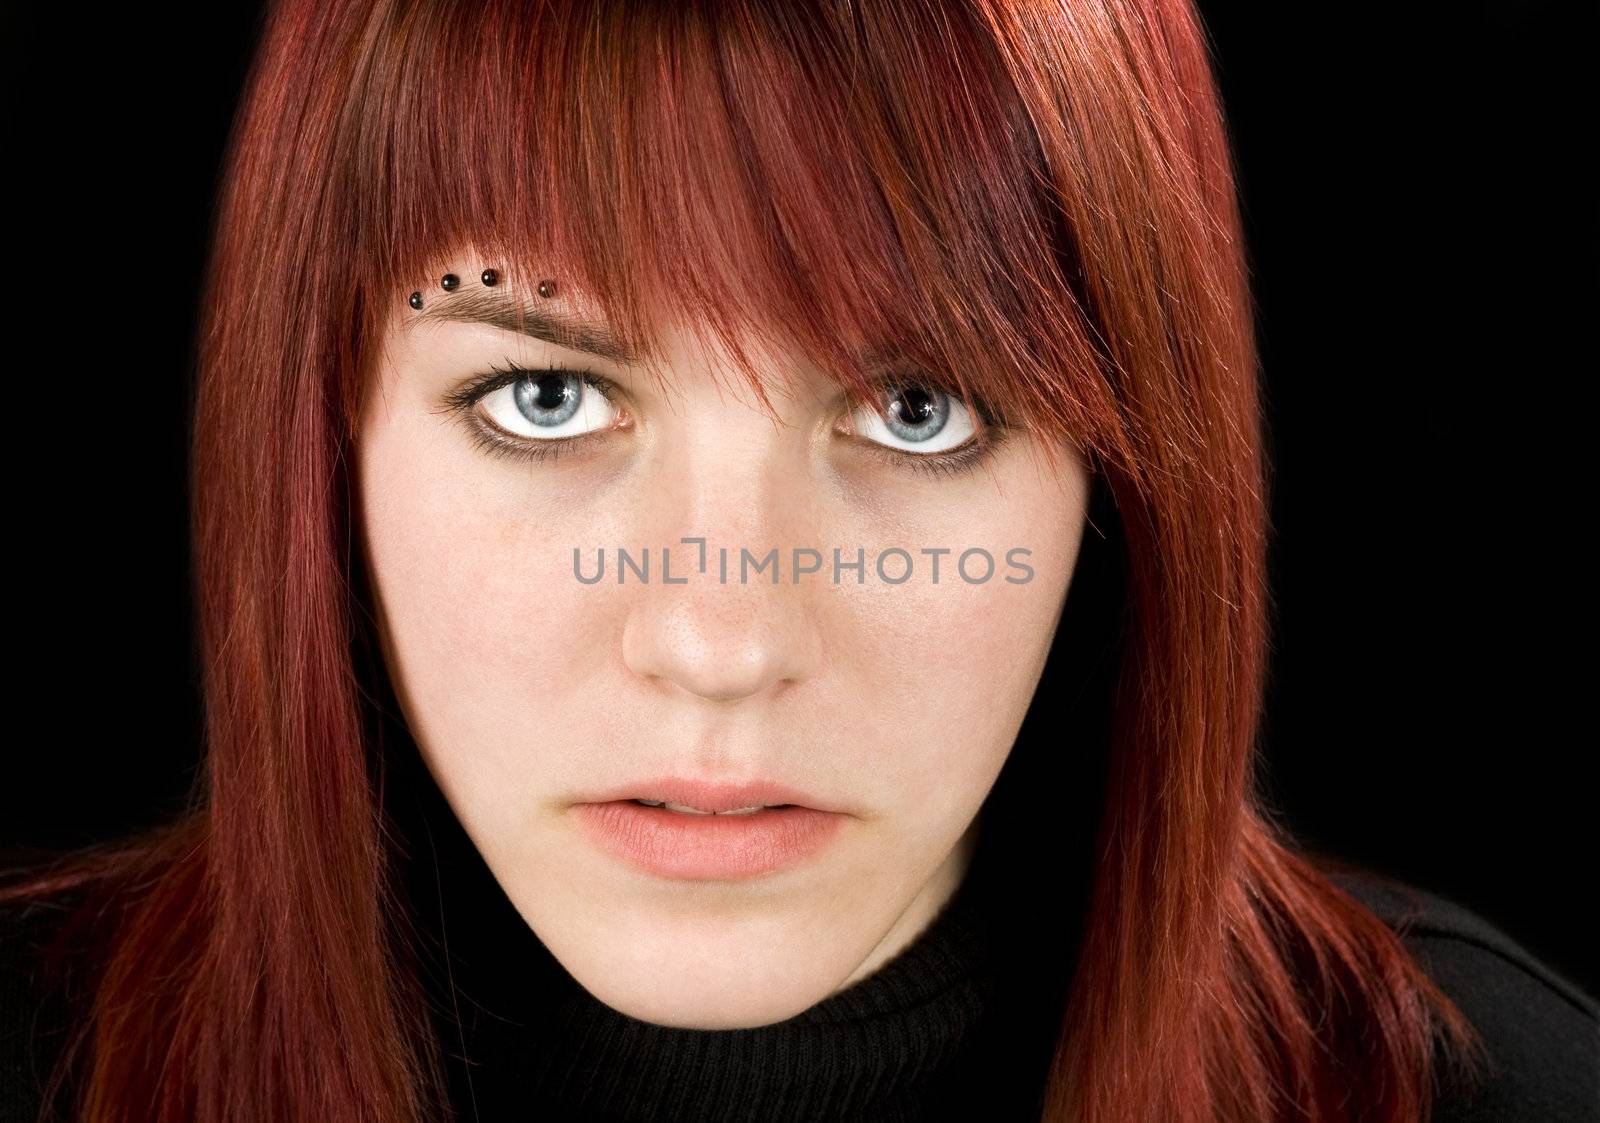 Simple frontal shot of a beautiful pierced redhead girl staring at the camera.

Studio shot.